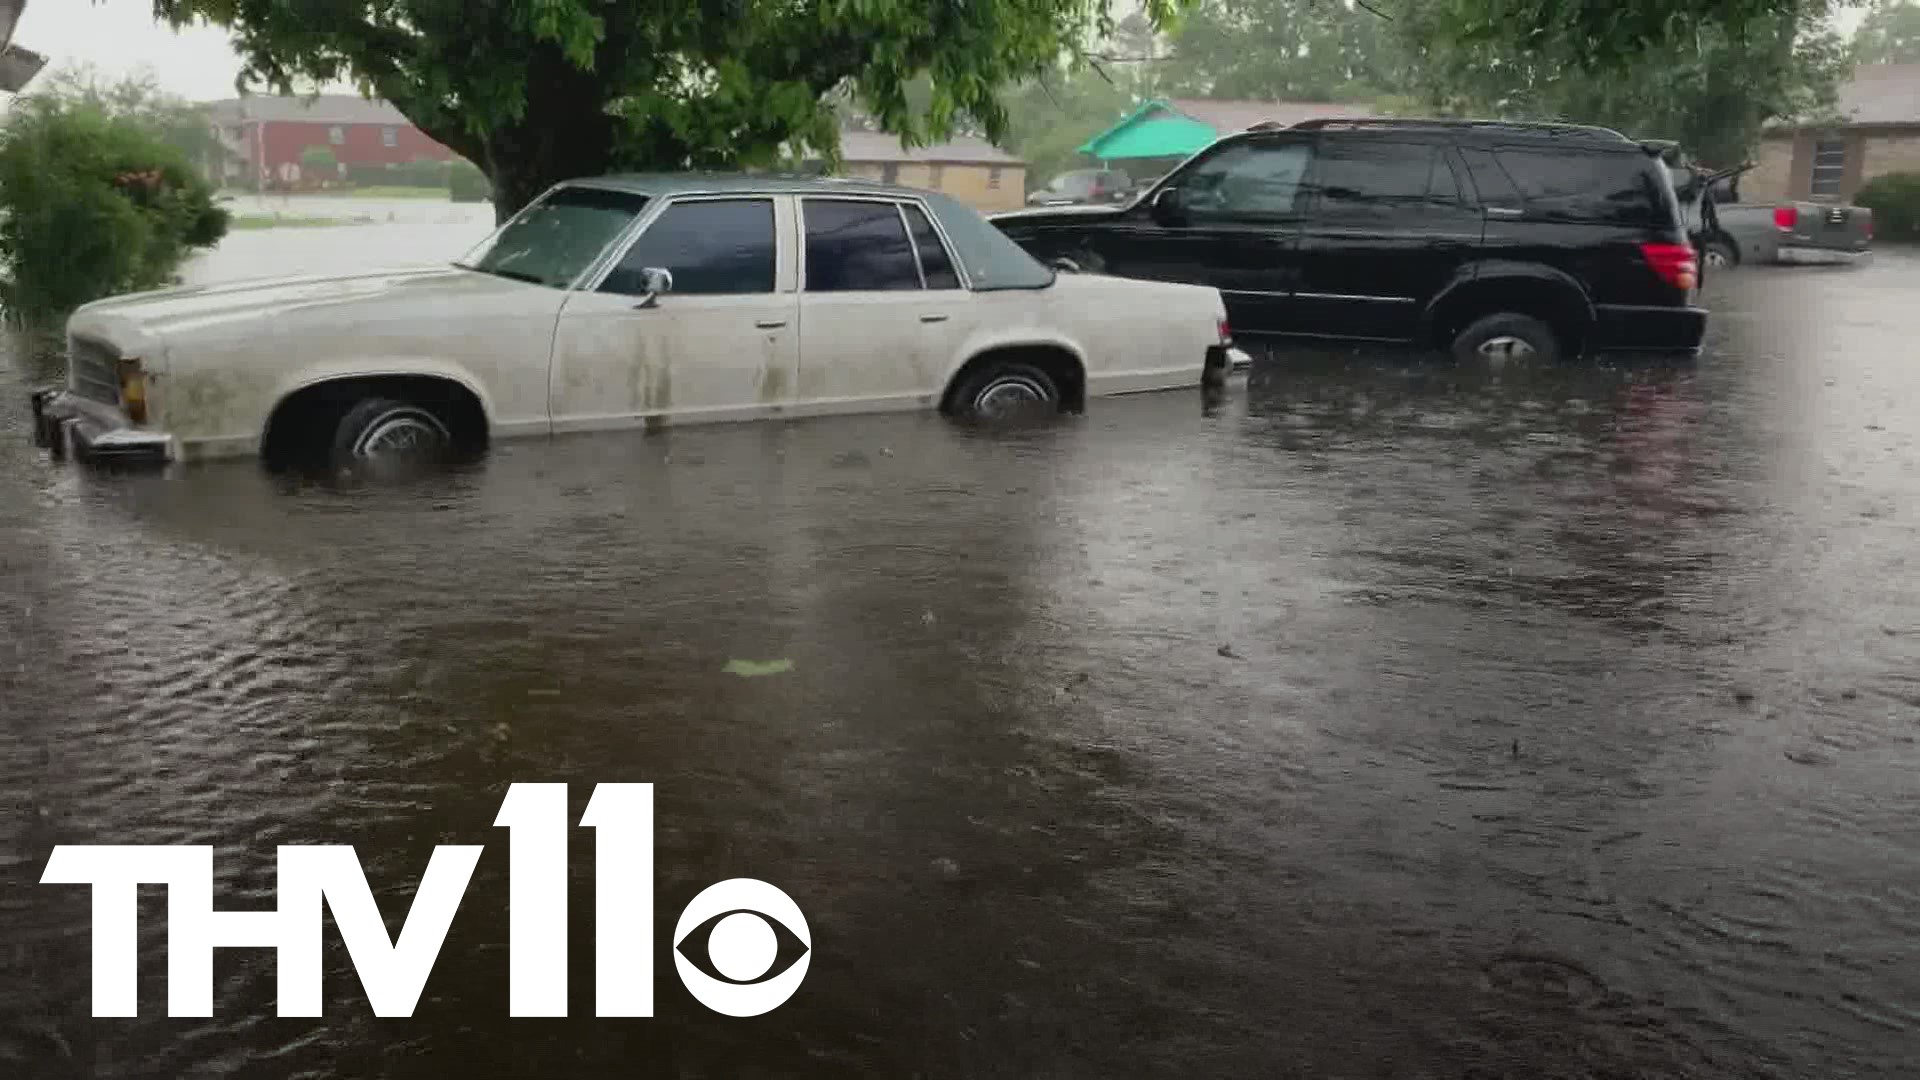 As Dumas saw flash flooding on Tuesday, officials told us how they want to encourage their communities to stay safe and be mindful.